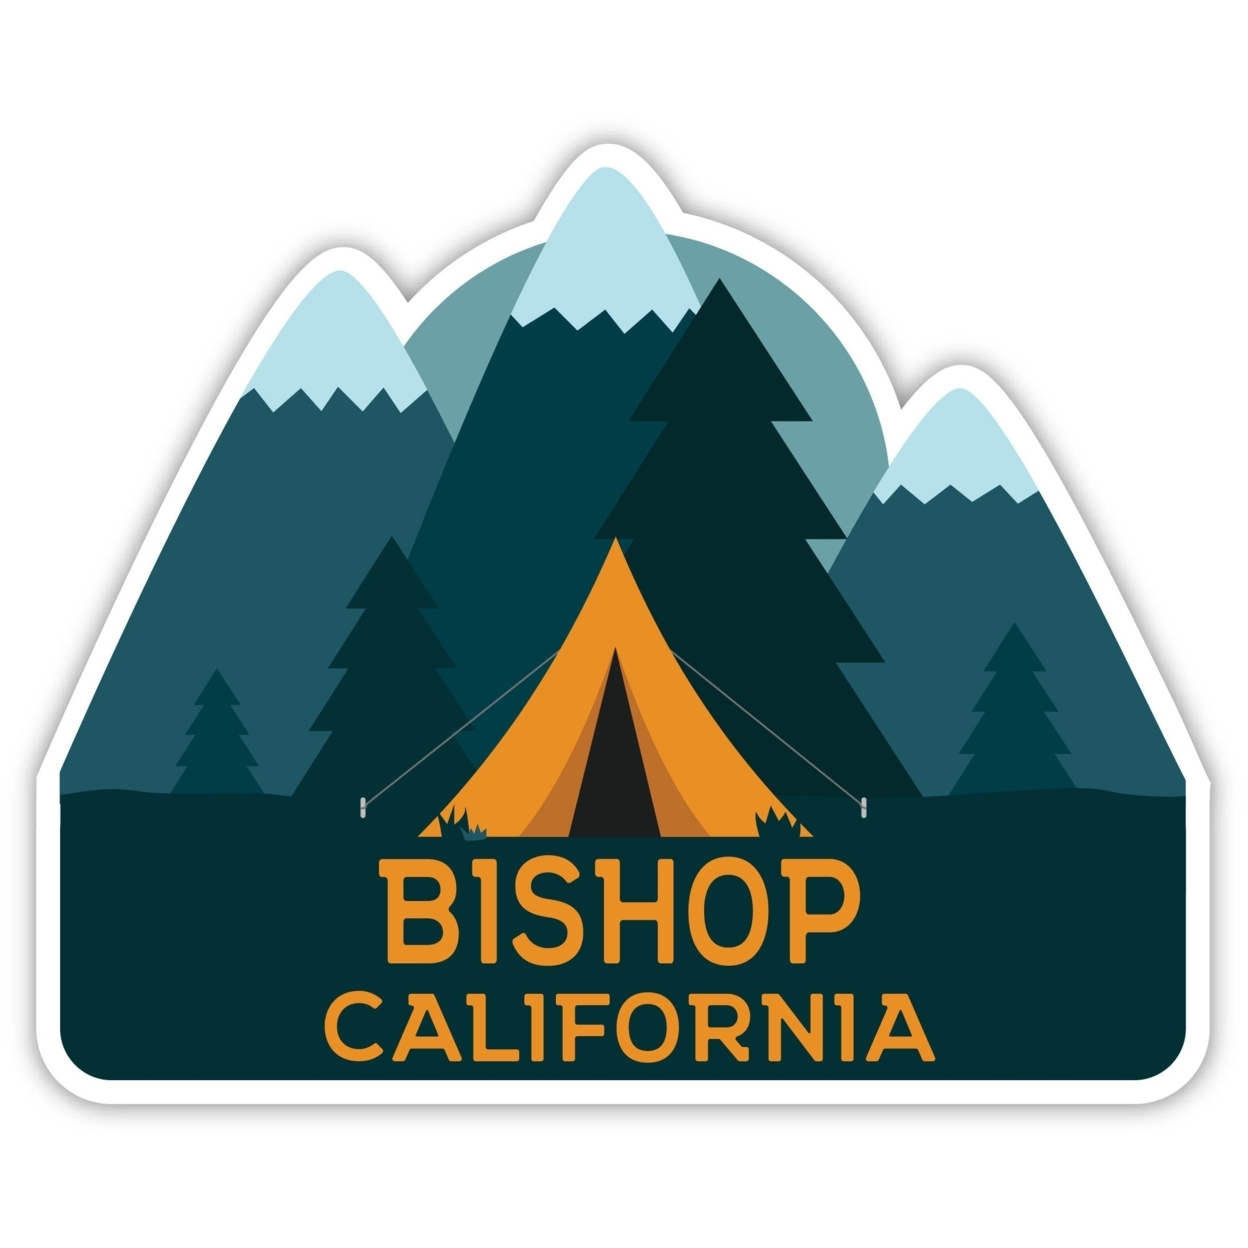 Bishop California Souvenir Decorative Stickers (Choose Theme And Size) - 4-Pack, 2-Inch, Tent